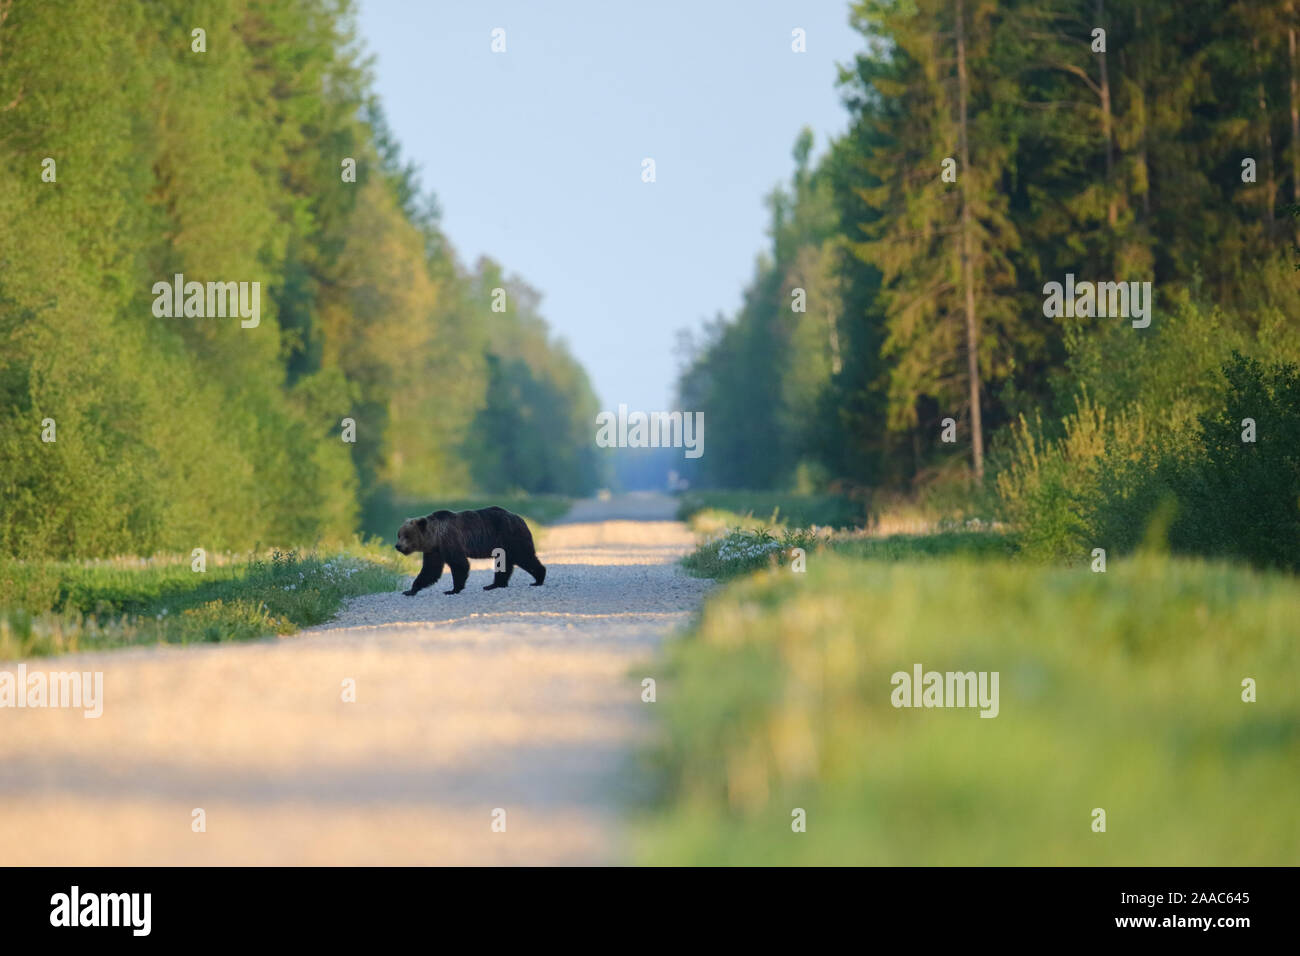 Brown Bear (Ursus arctos) walking on the road in forest. Alutaguse, Estonia Stock Photo